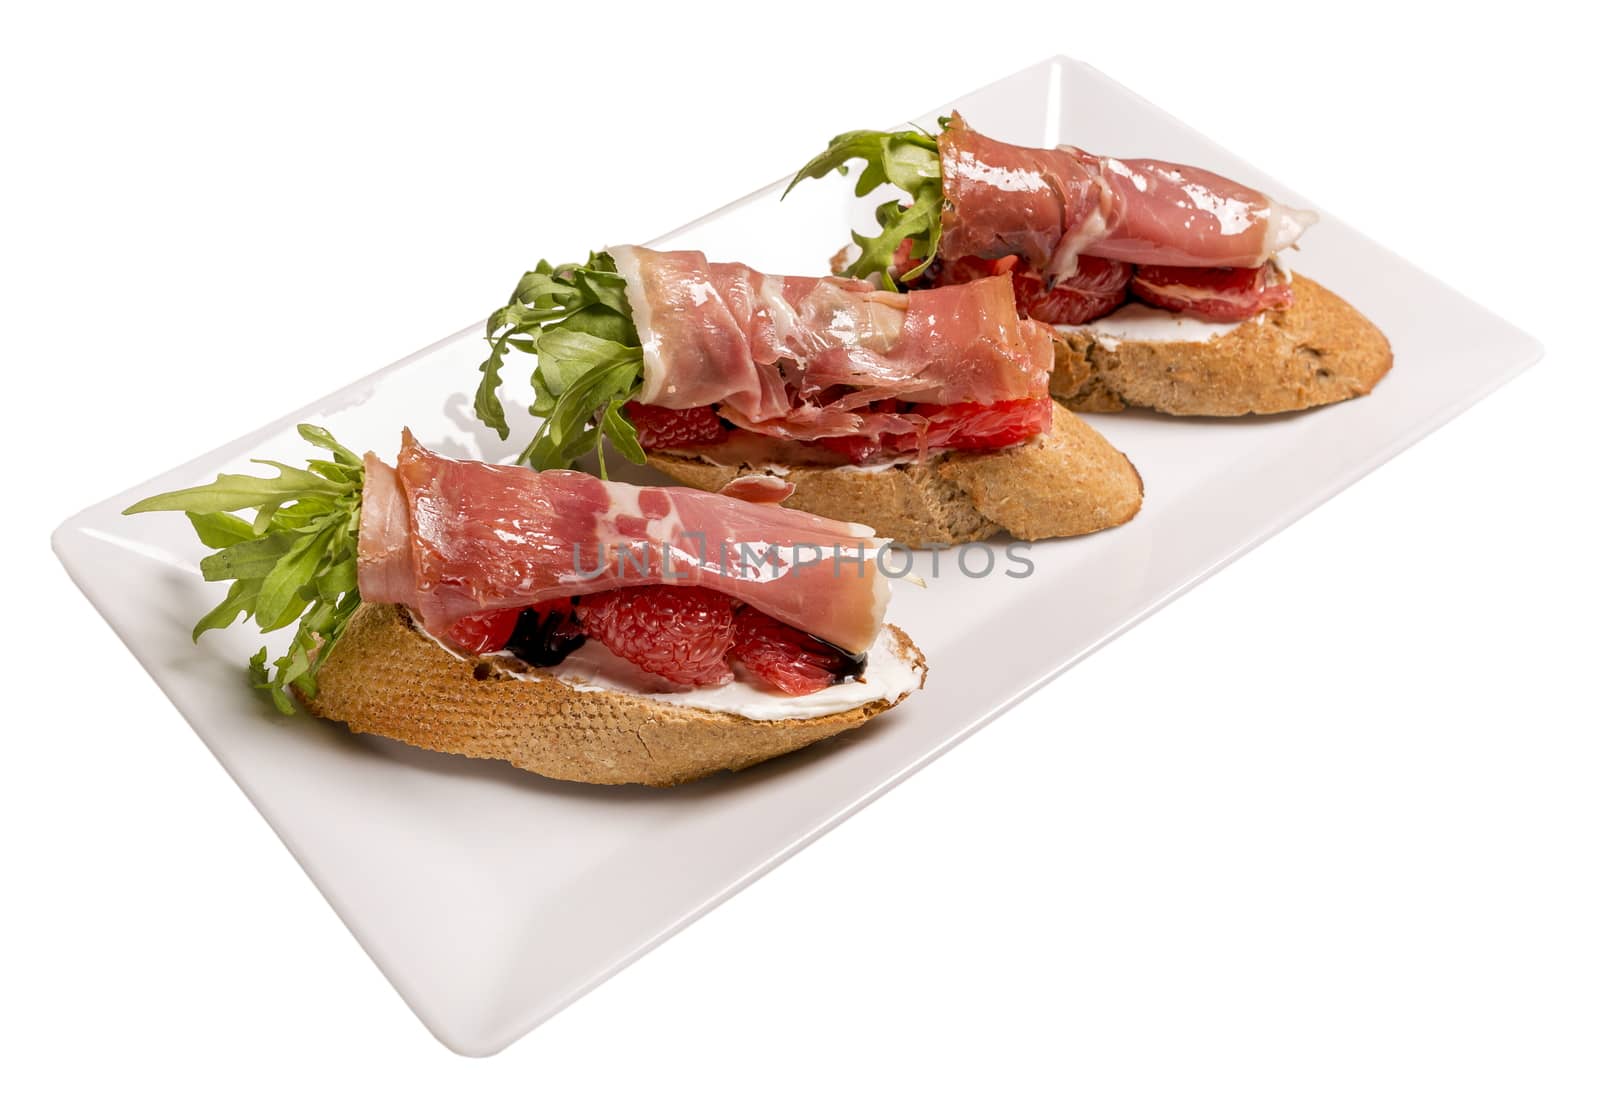 Bruschettes with jamon and grapefruit. Isolated image on white background. by 977_ReX_977